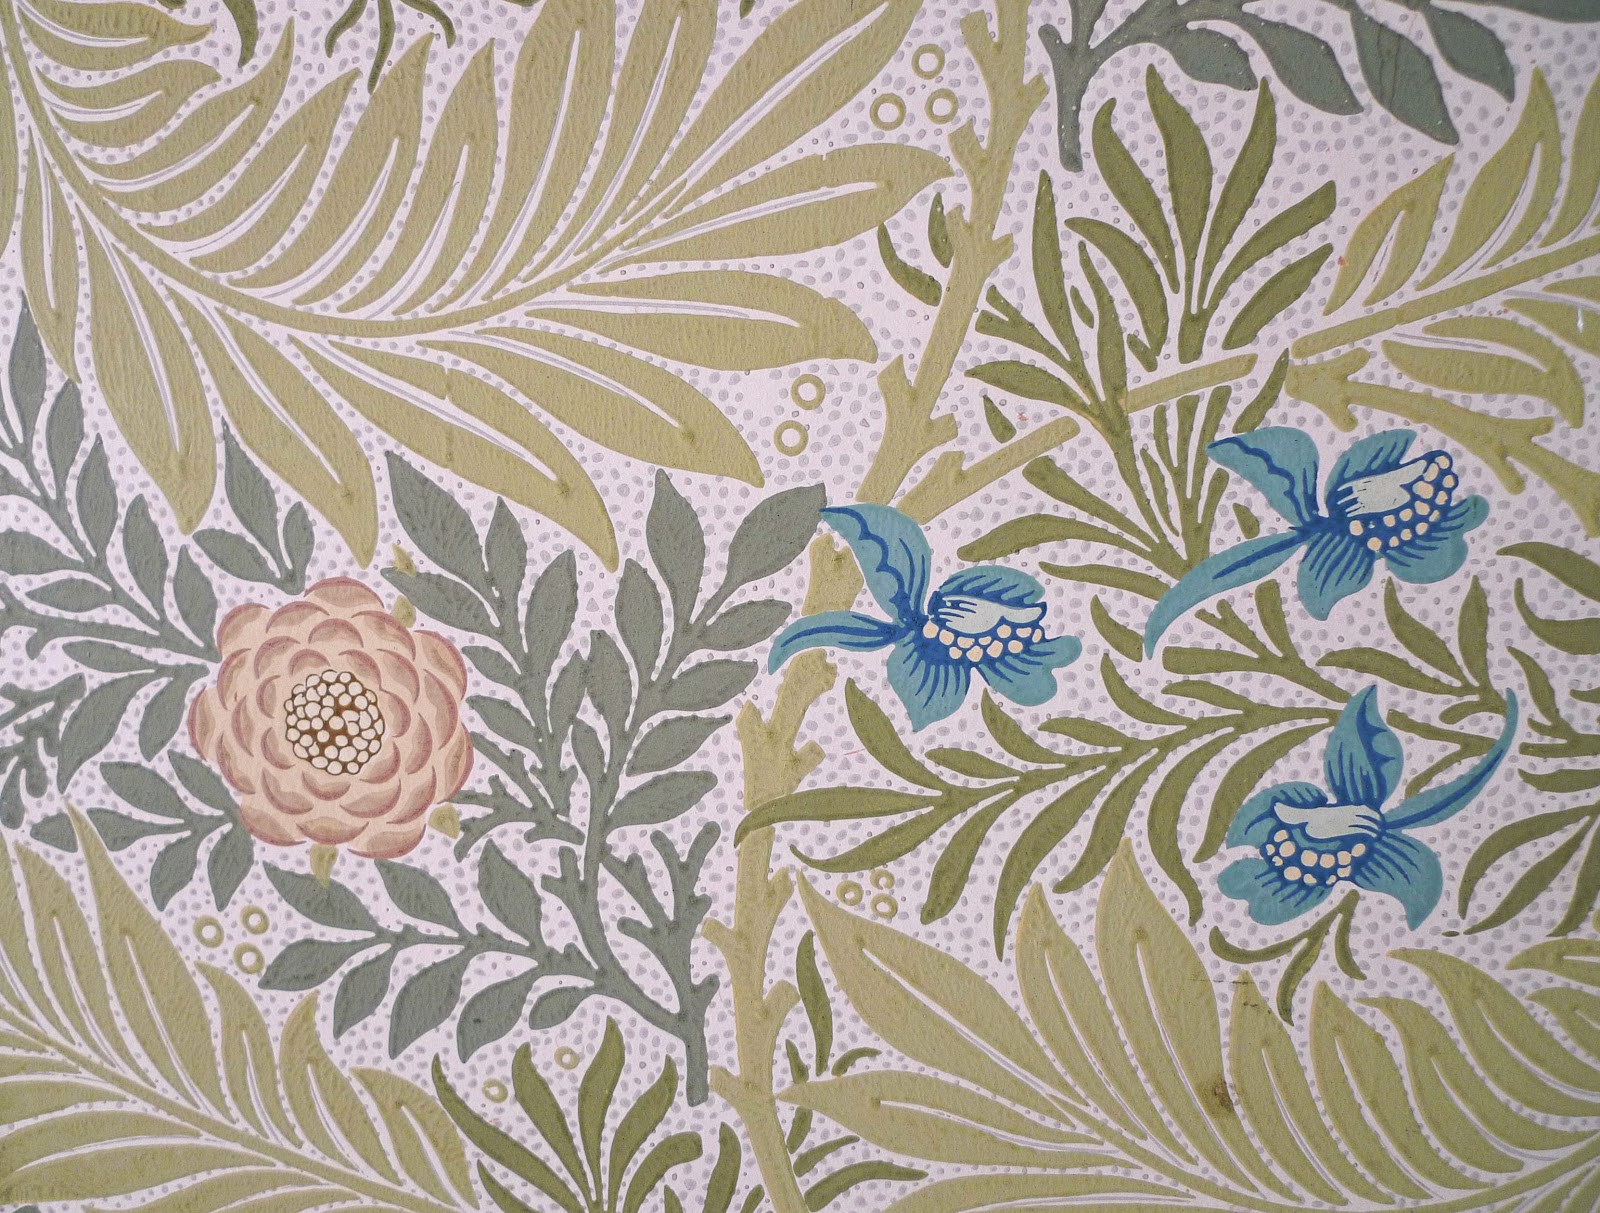 Arts And Crafts Movement Wallpaper Whispering Women William